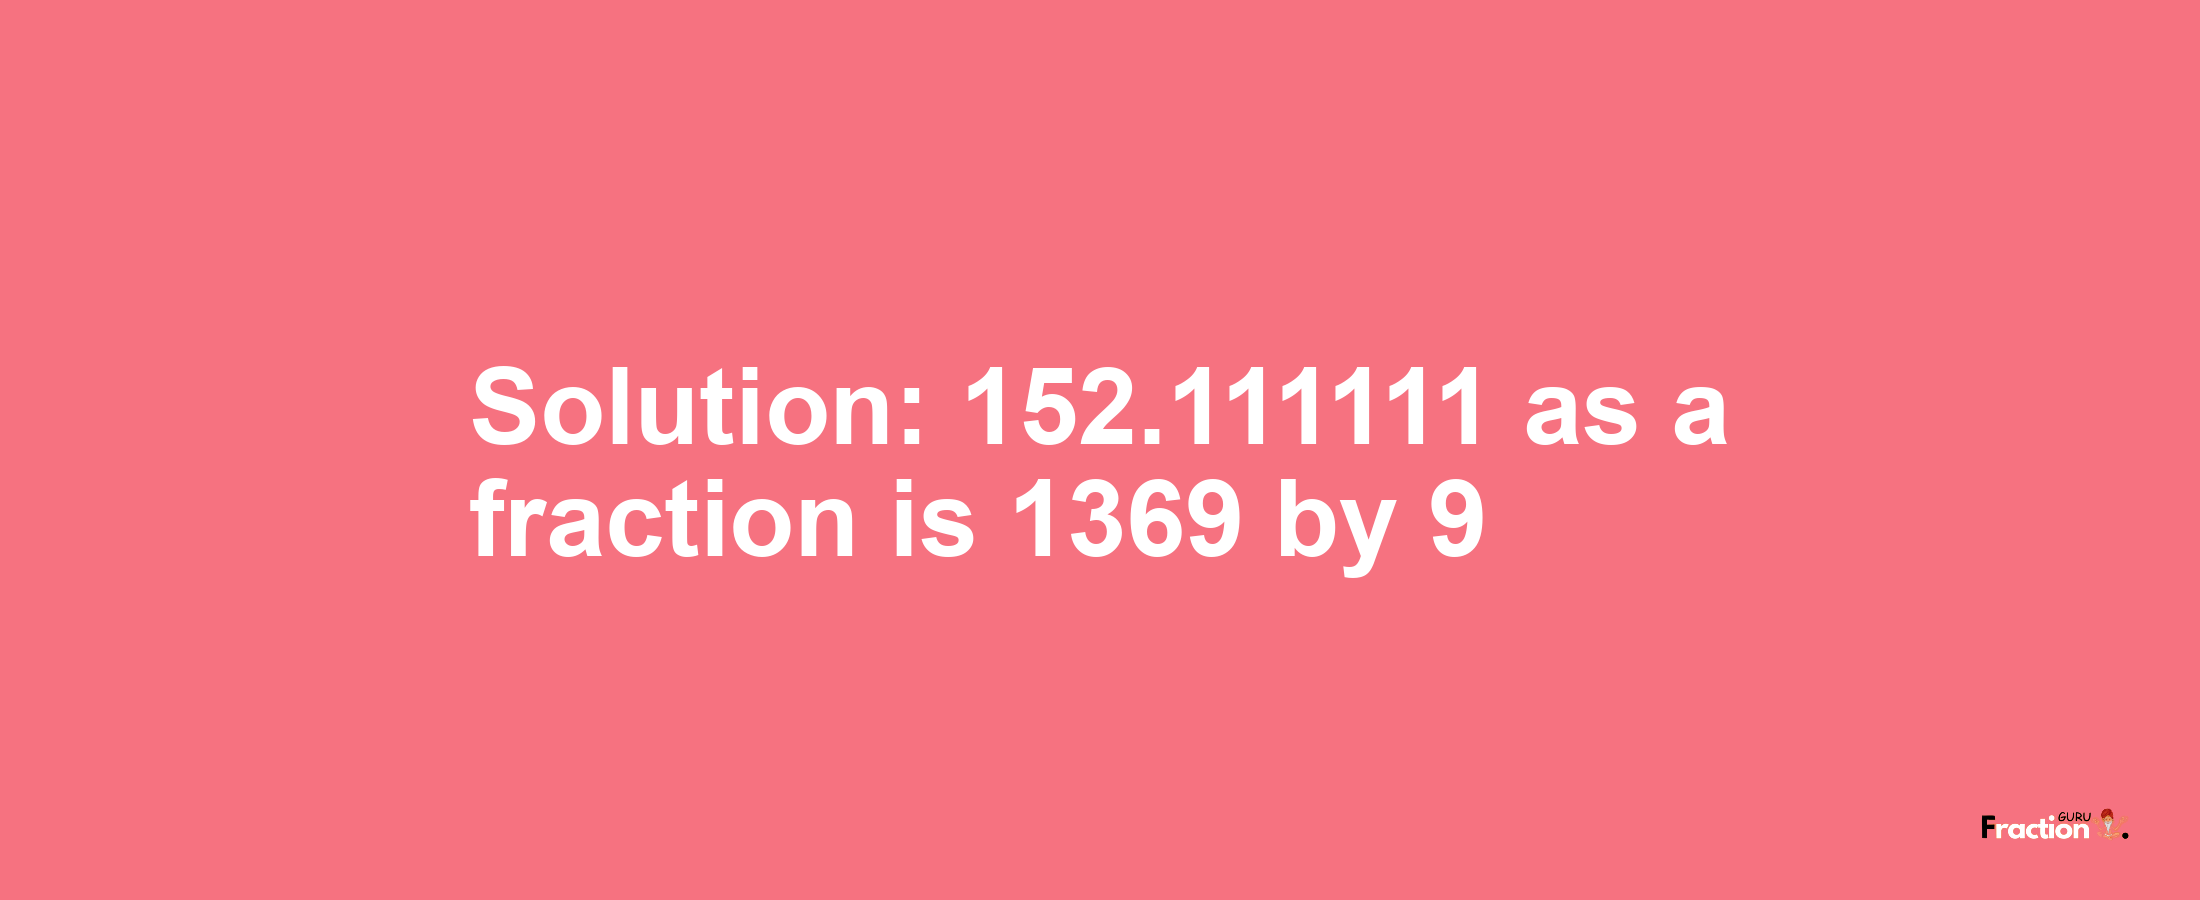 Solution:152.111111 as a fraction is 1369/9